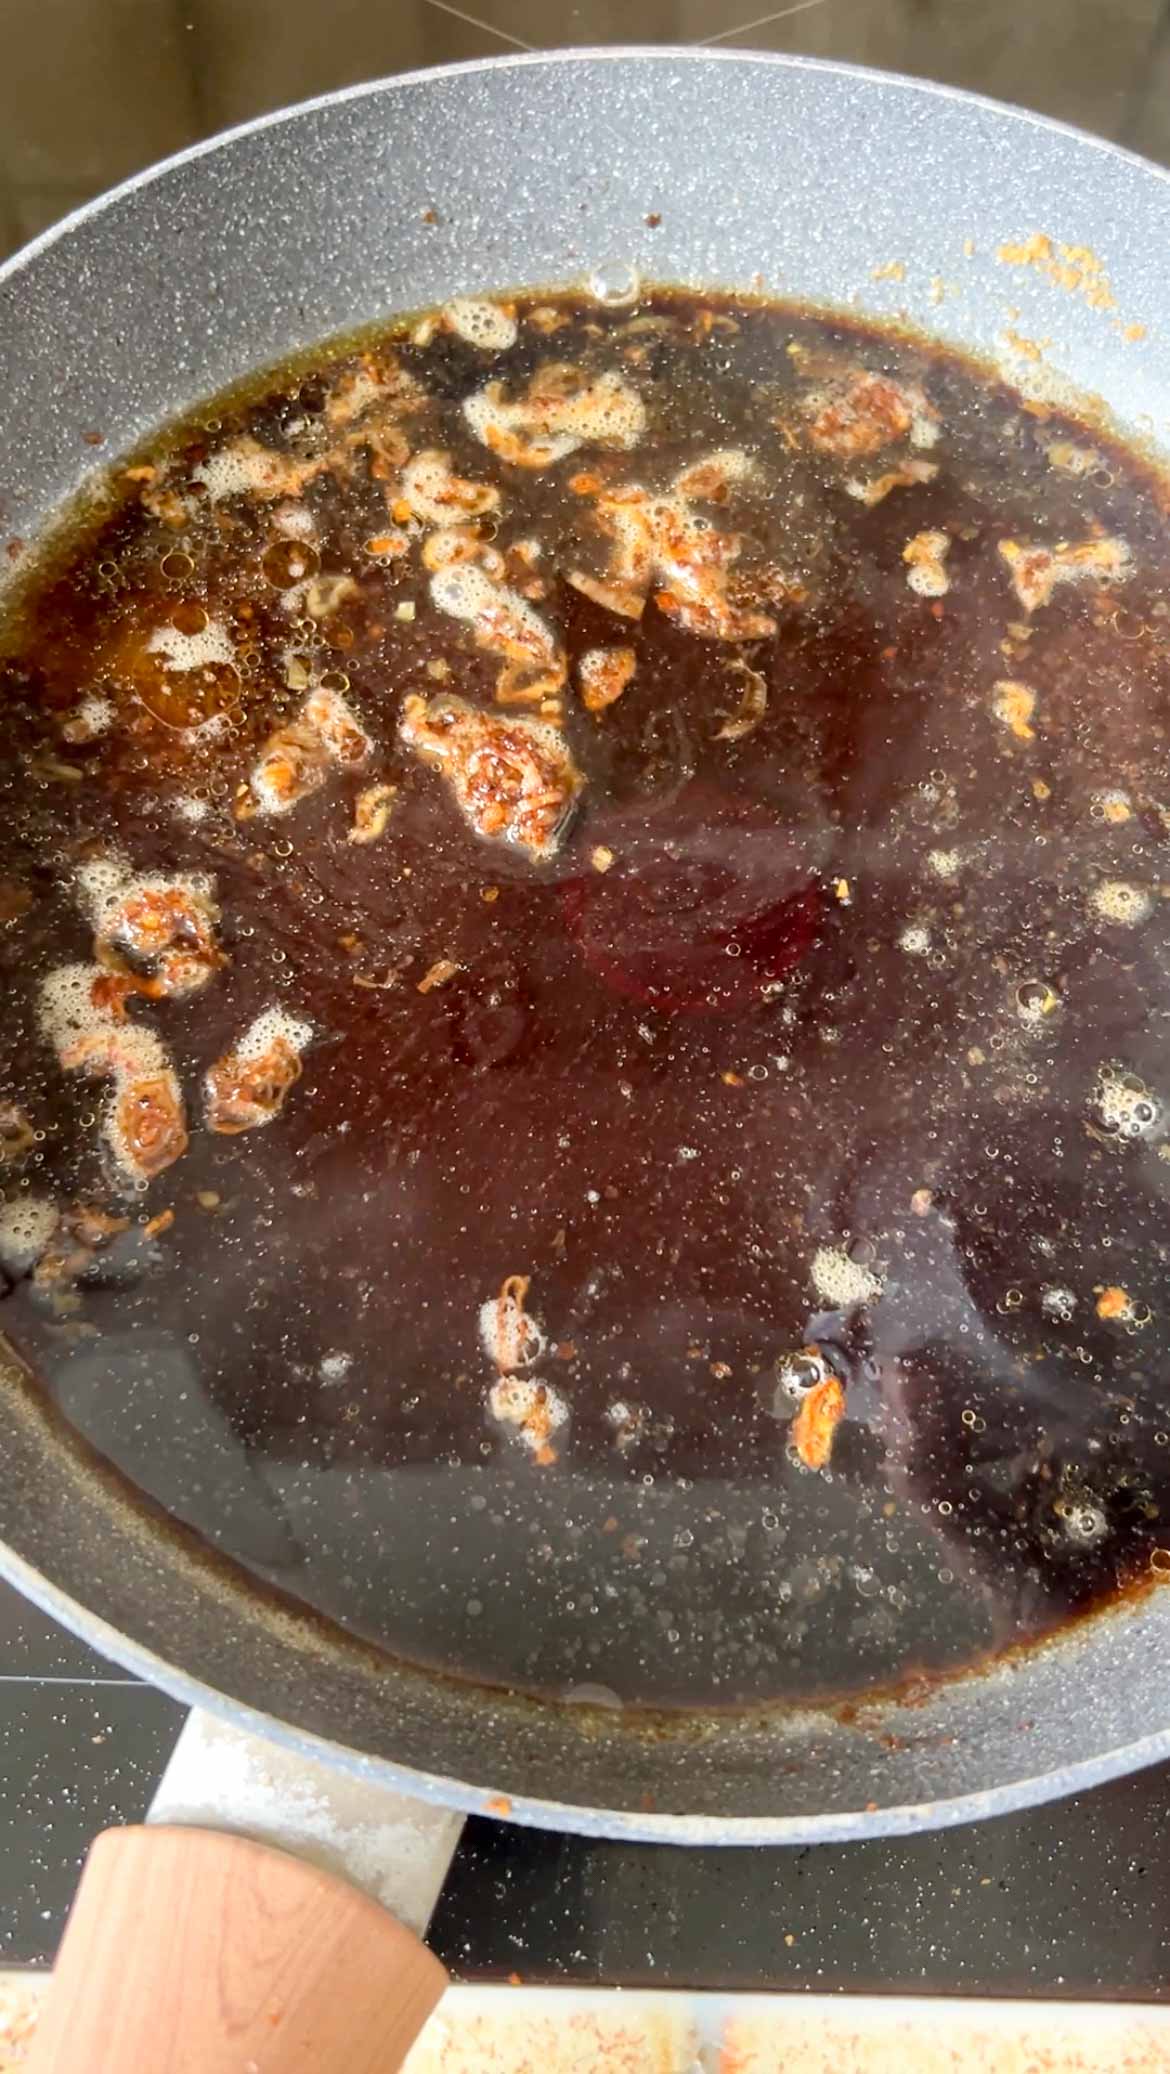 Soy sauce added to the frying pan of minced shallot and Dashi stock.